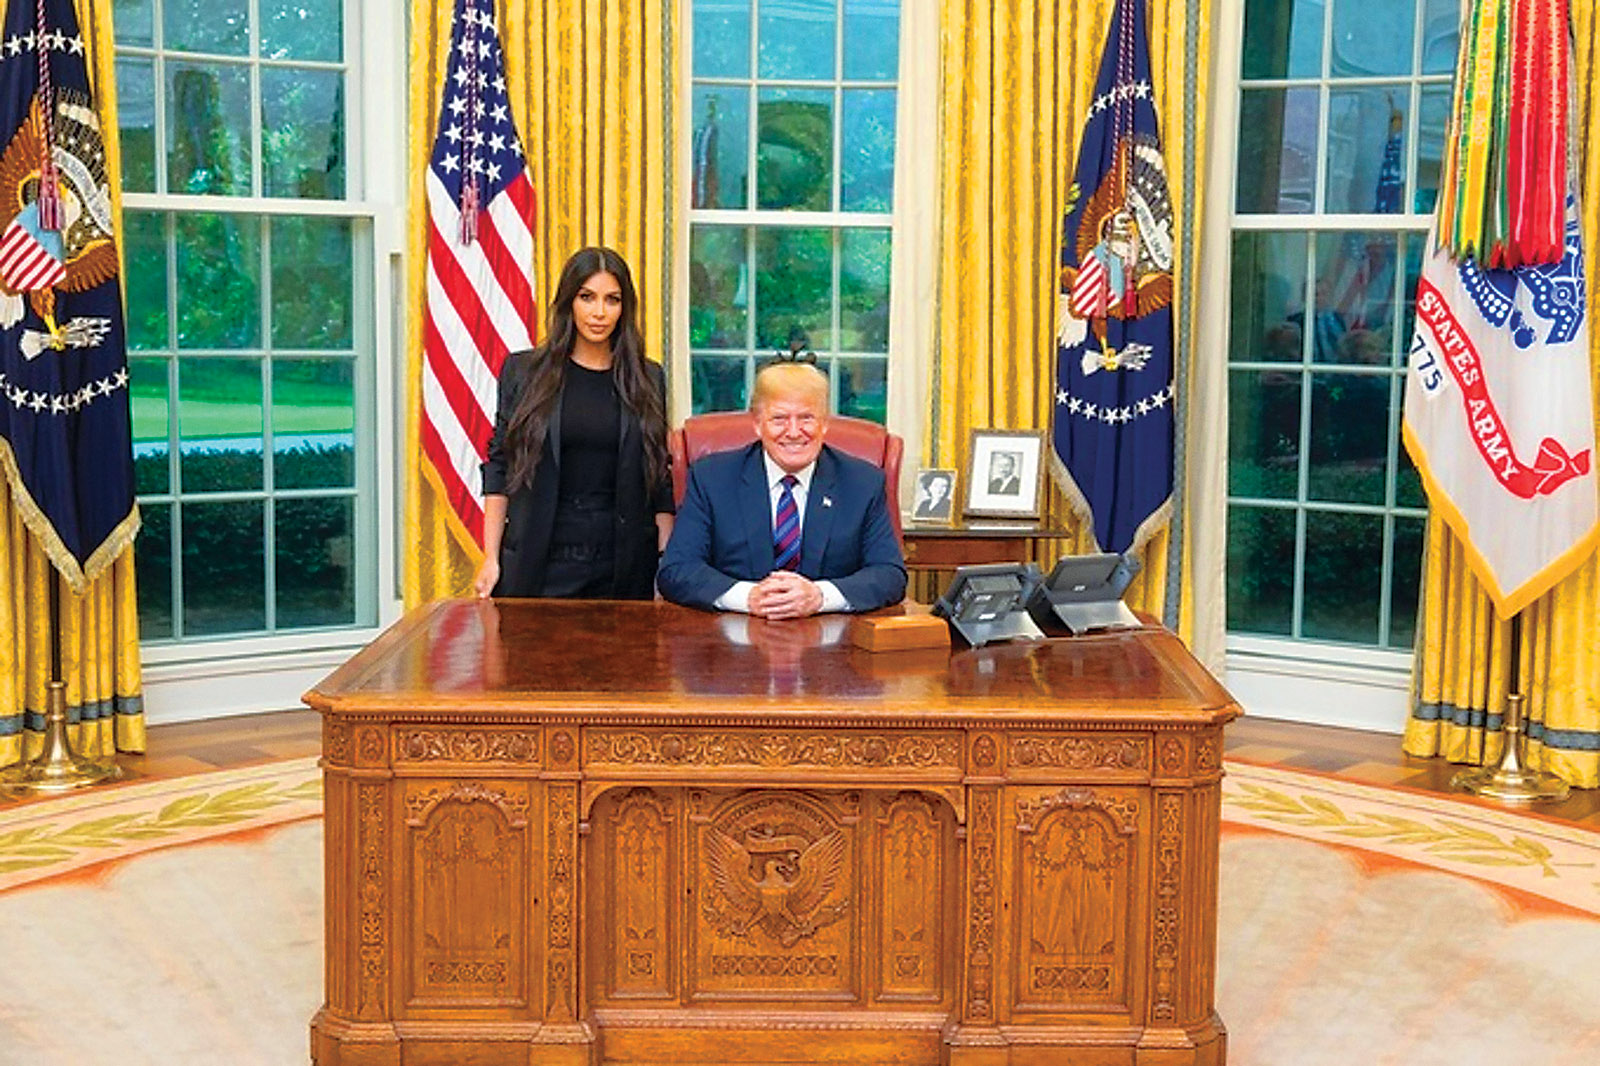 Kim Kardashian West and President Donald Trump in the Oval Office